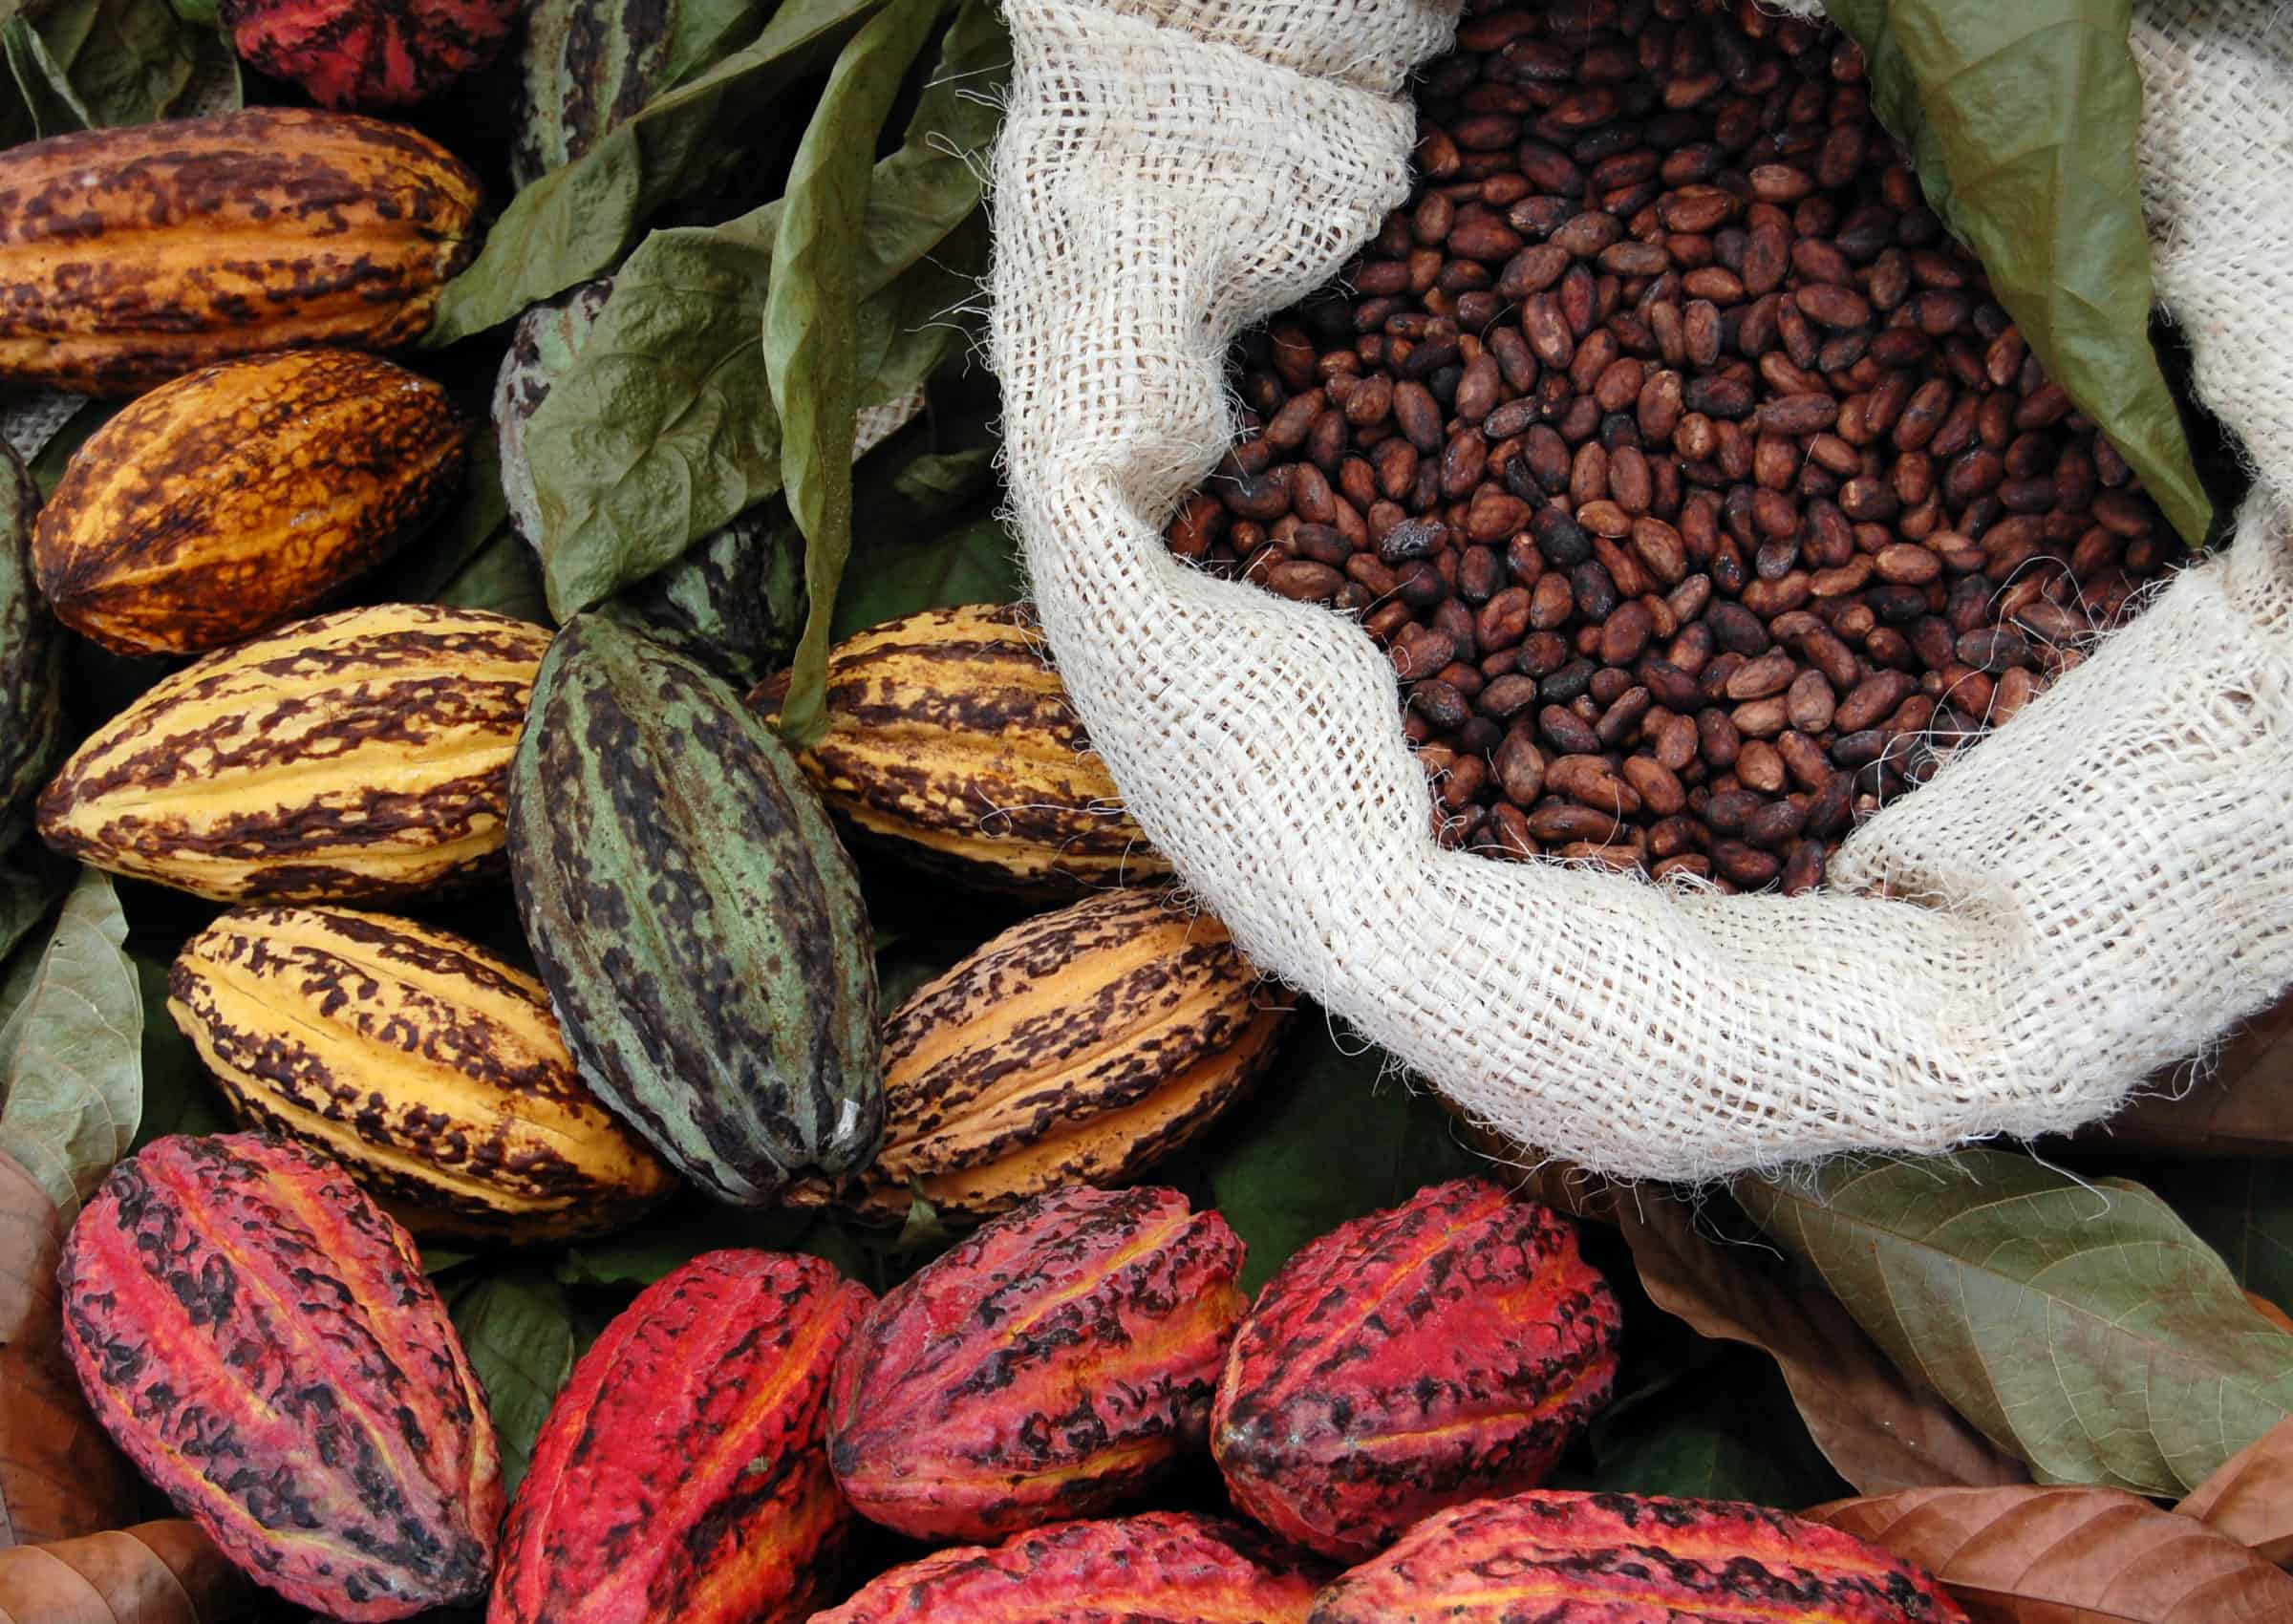 Royal Tropical Institute (KIT) , Cocoa Sector, Ghana, Côte d’Ivoire, Cocoa Post, WCF